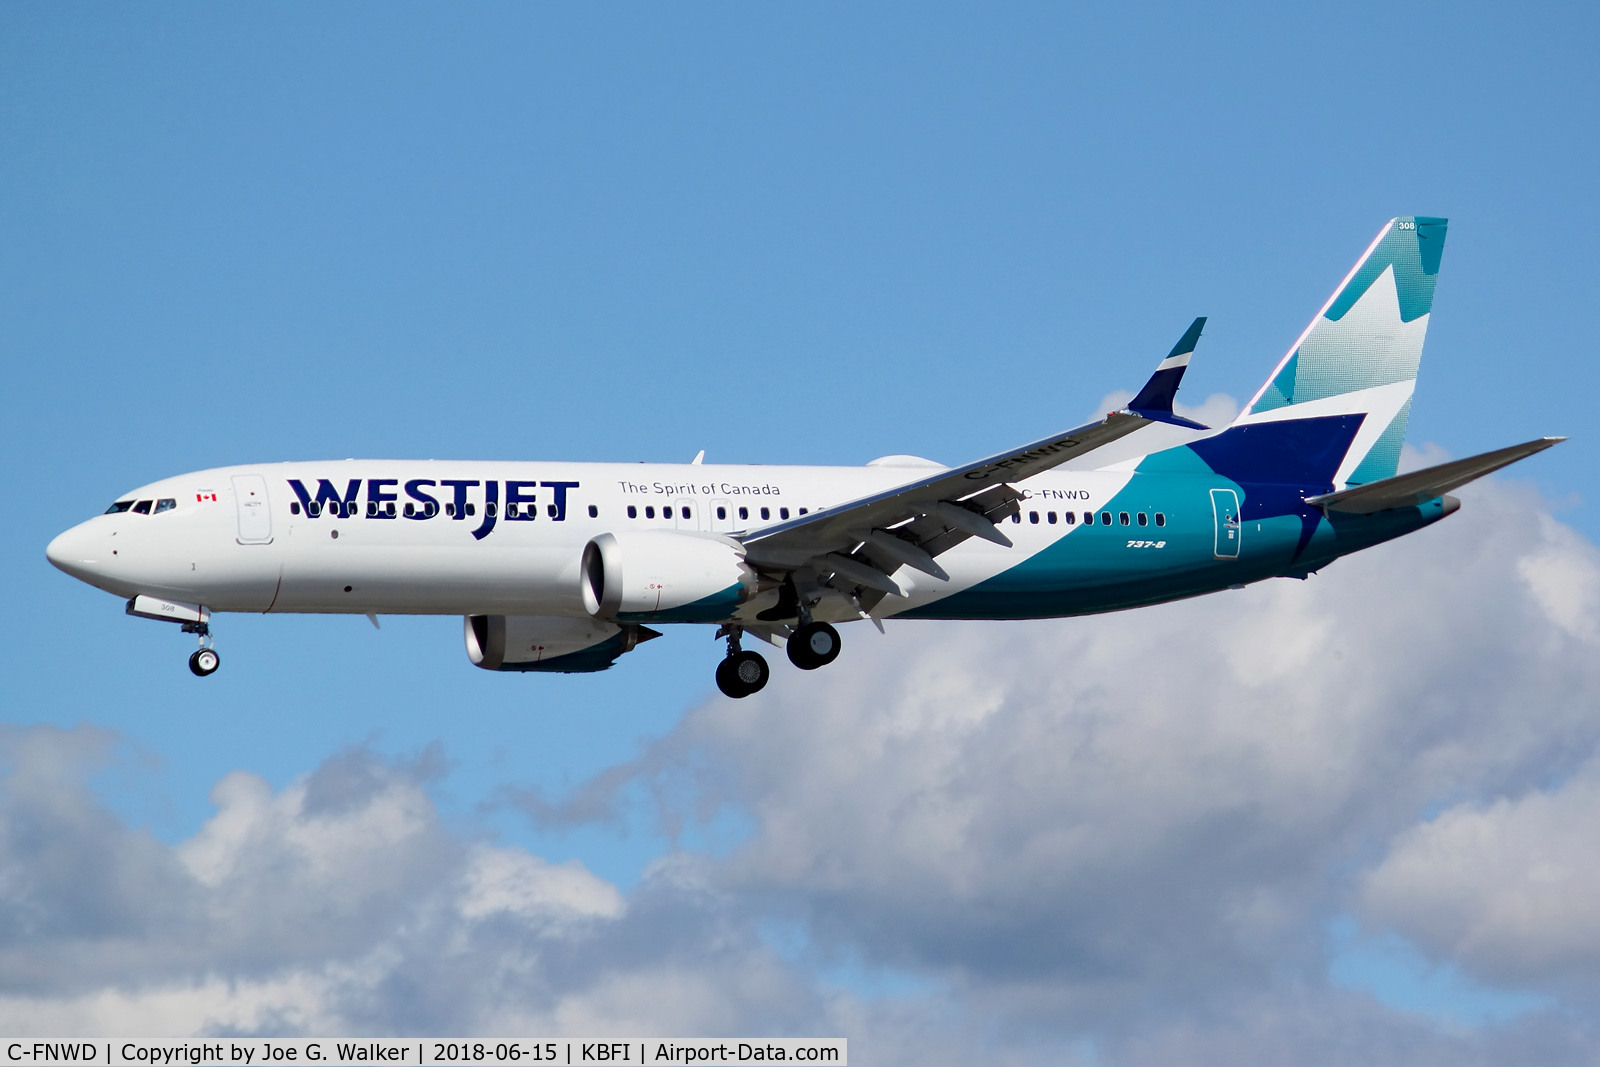 C-FNWD, 2018 Boeing 737-8 MAX C/N 60517, New livery for Westjet displayed on this new 737MAX8